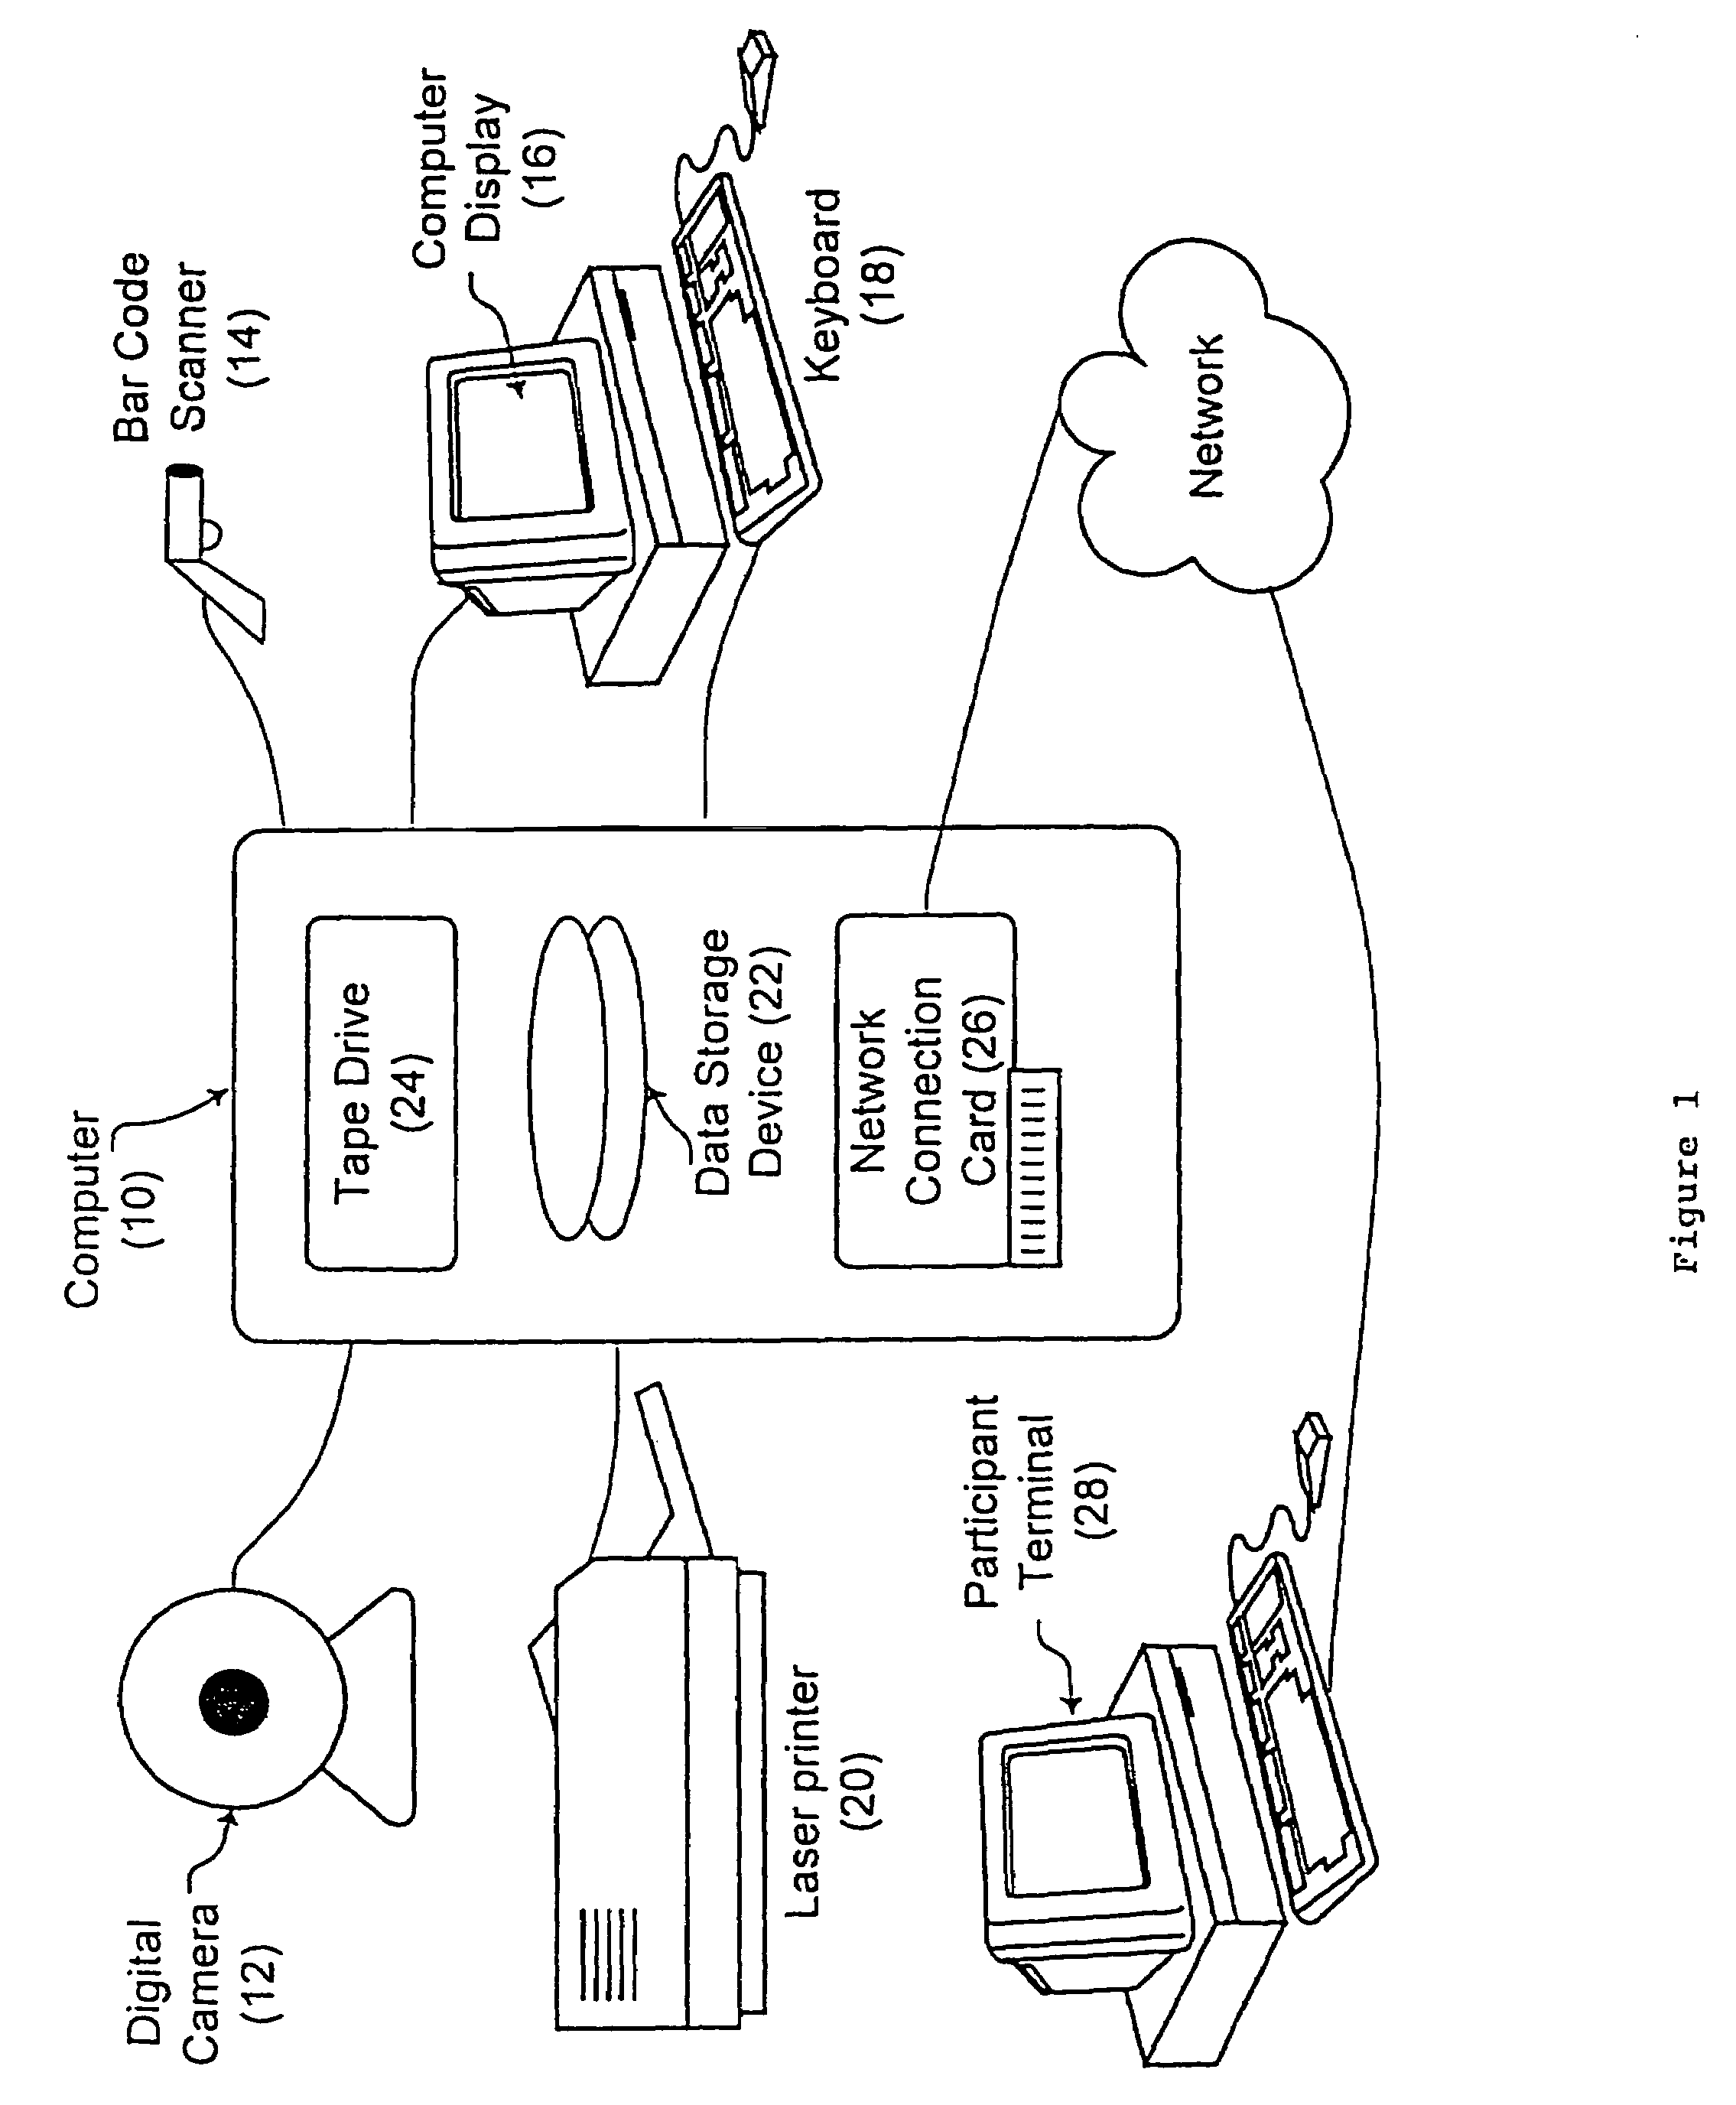 Method for facilitating commerce at an internet-based auction